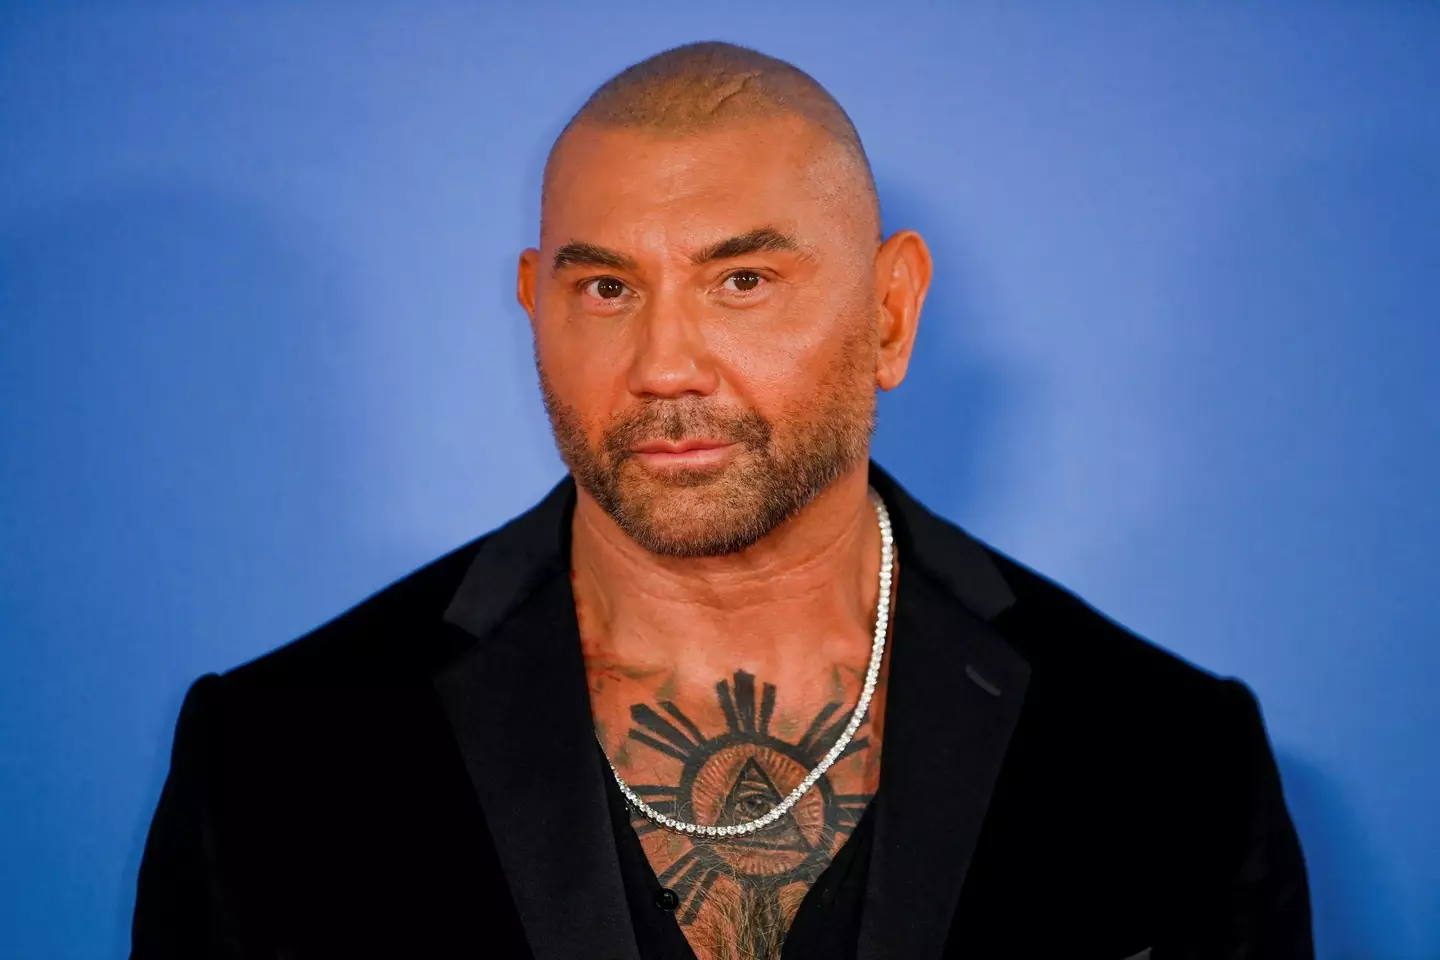 Dave Bautista said he feels ‘relief’ at leaving Drax behind.